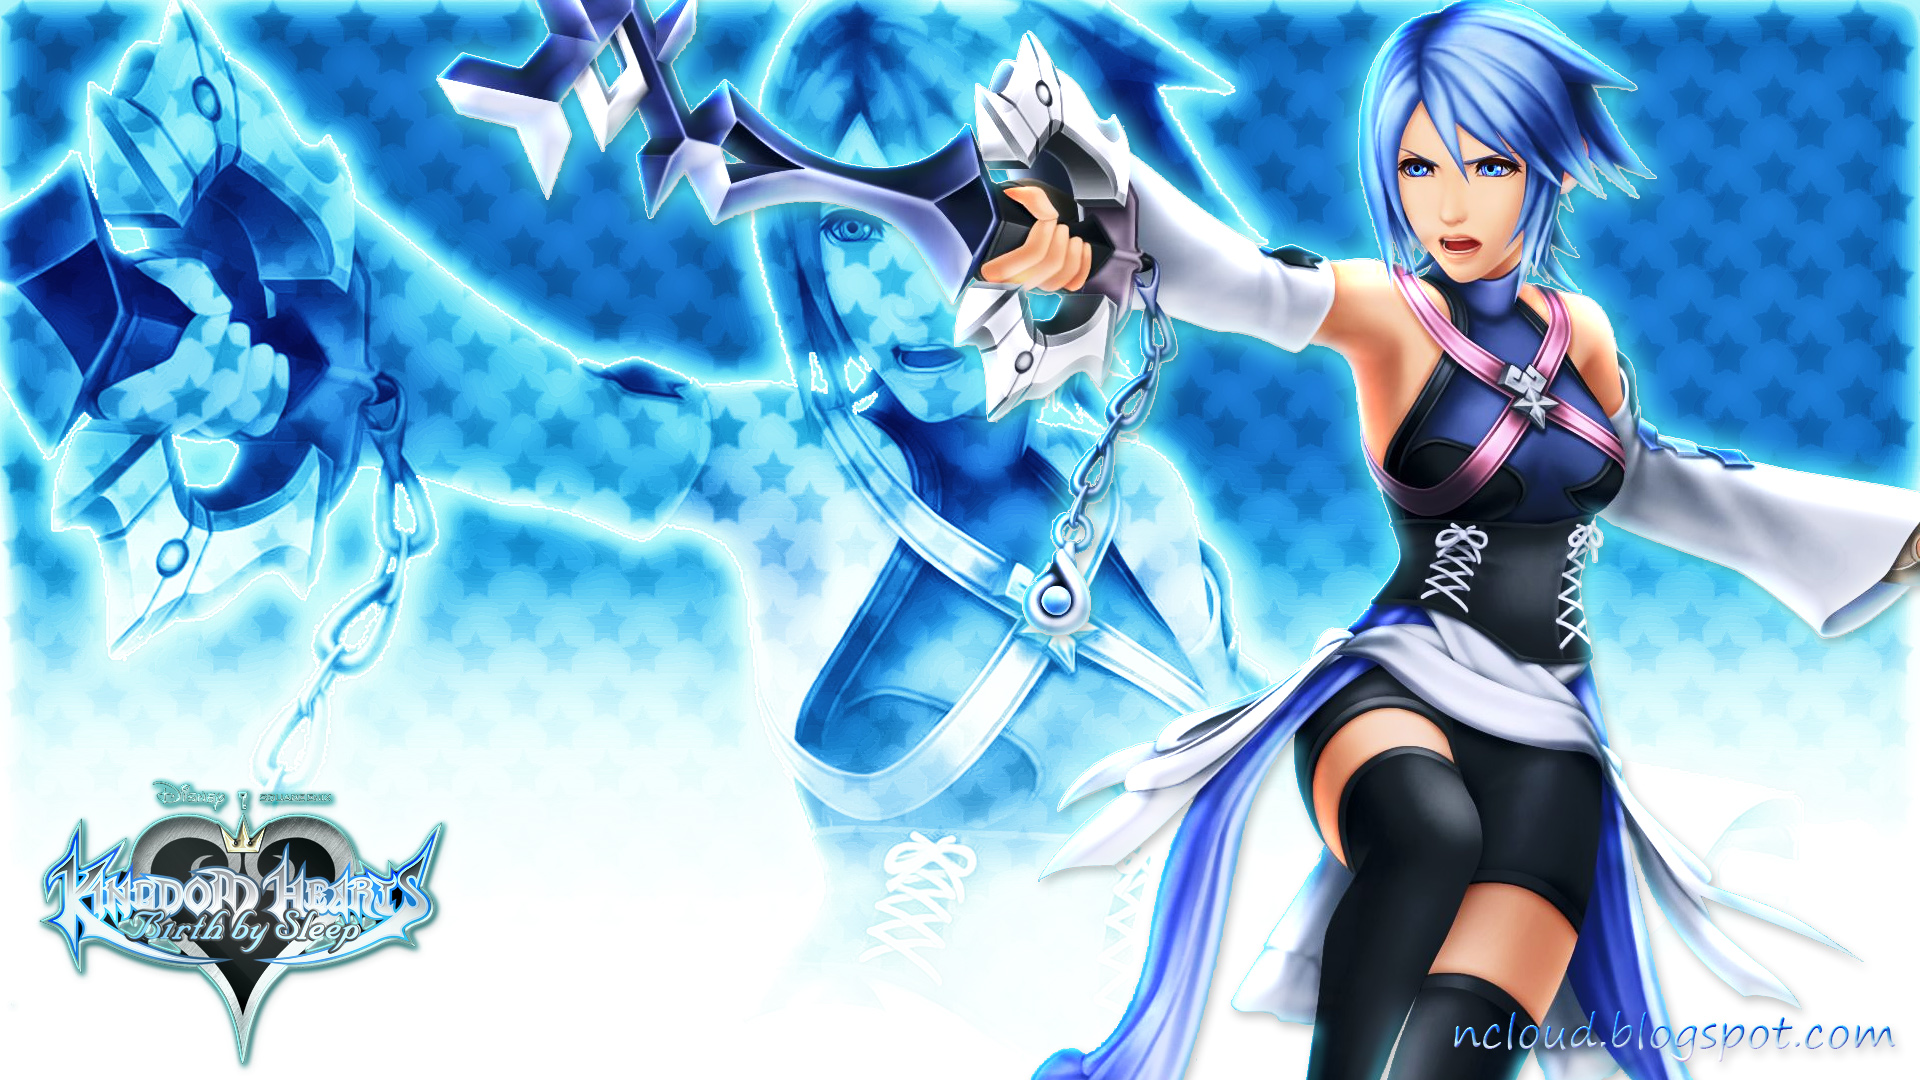 Free download Movies Music Anime My Kingdom Hearts Birth By Sleep Aqua Wallpaper [1920x1080] for your Desktop, Mobile & Tablet. Explore Kingdom Hearts PSP Wallpaper. Kingdom Hearts PSP Wallpaper